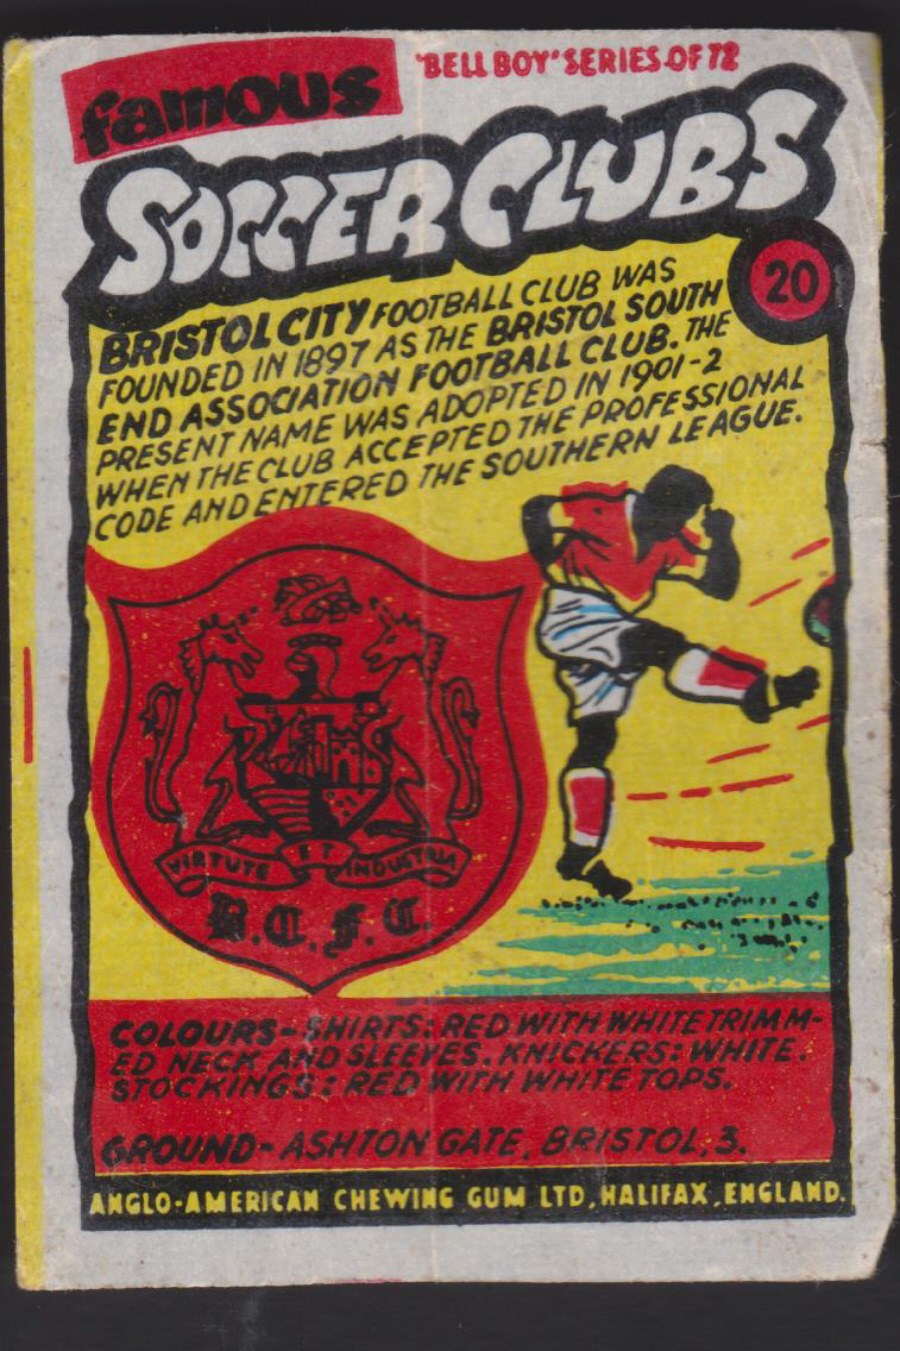 Anglo-American-Chewing-Gum-Wax-Wrapper-Famous-Soccer-Clubs-No-20 - Bristol City - Click Image to Close